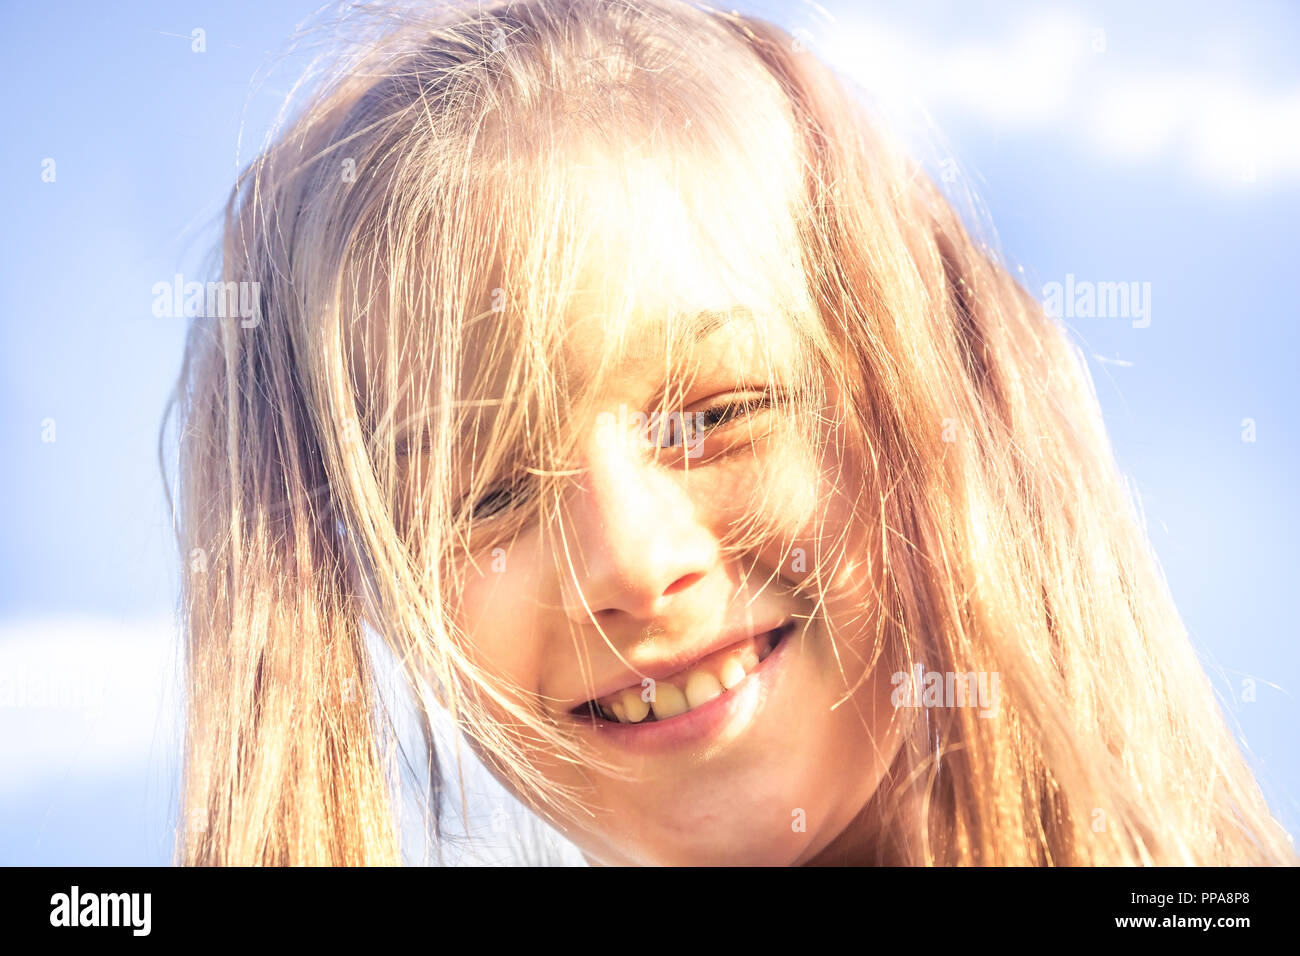 Cute Smiling Beautiful Kid Girl Sunny Portrait With Hair Cut